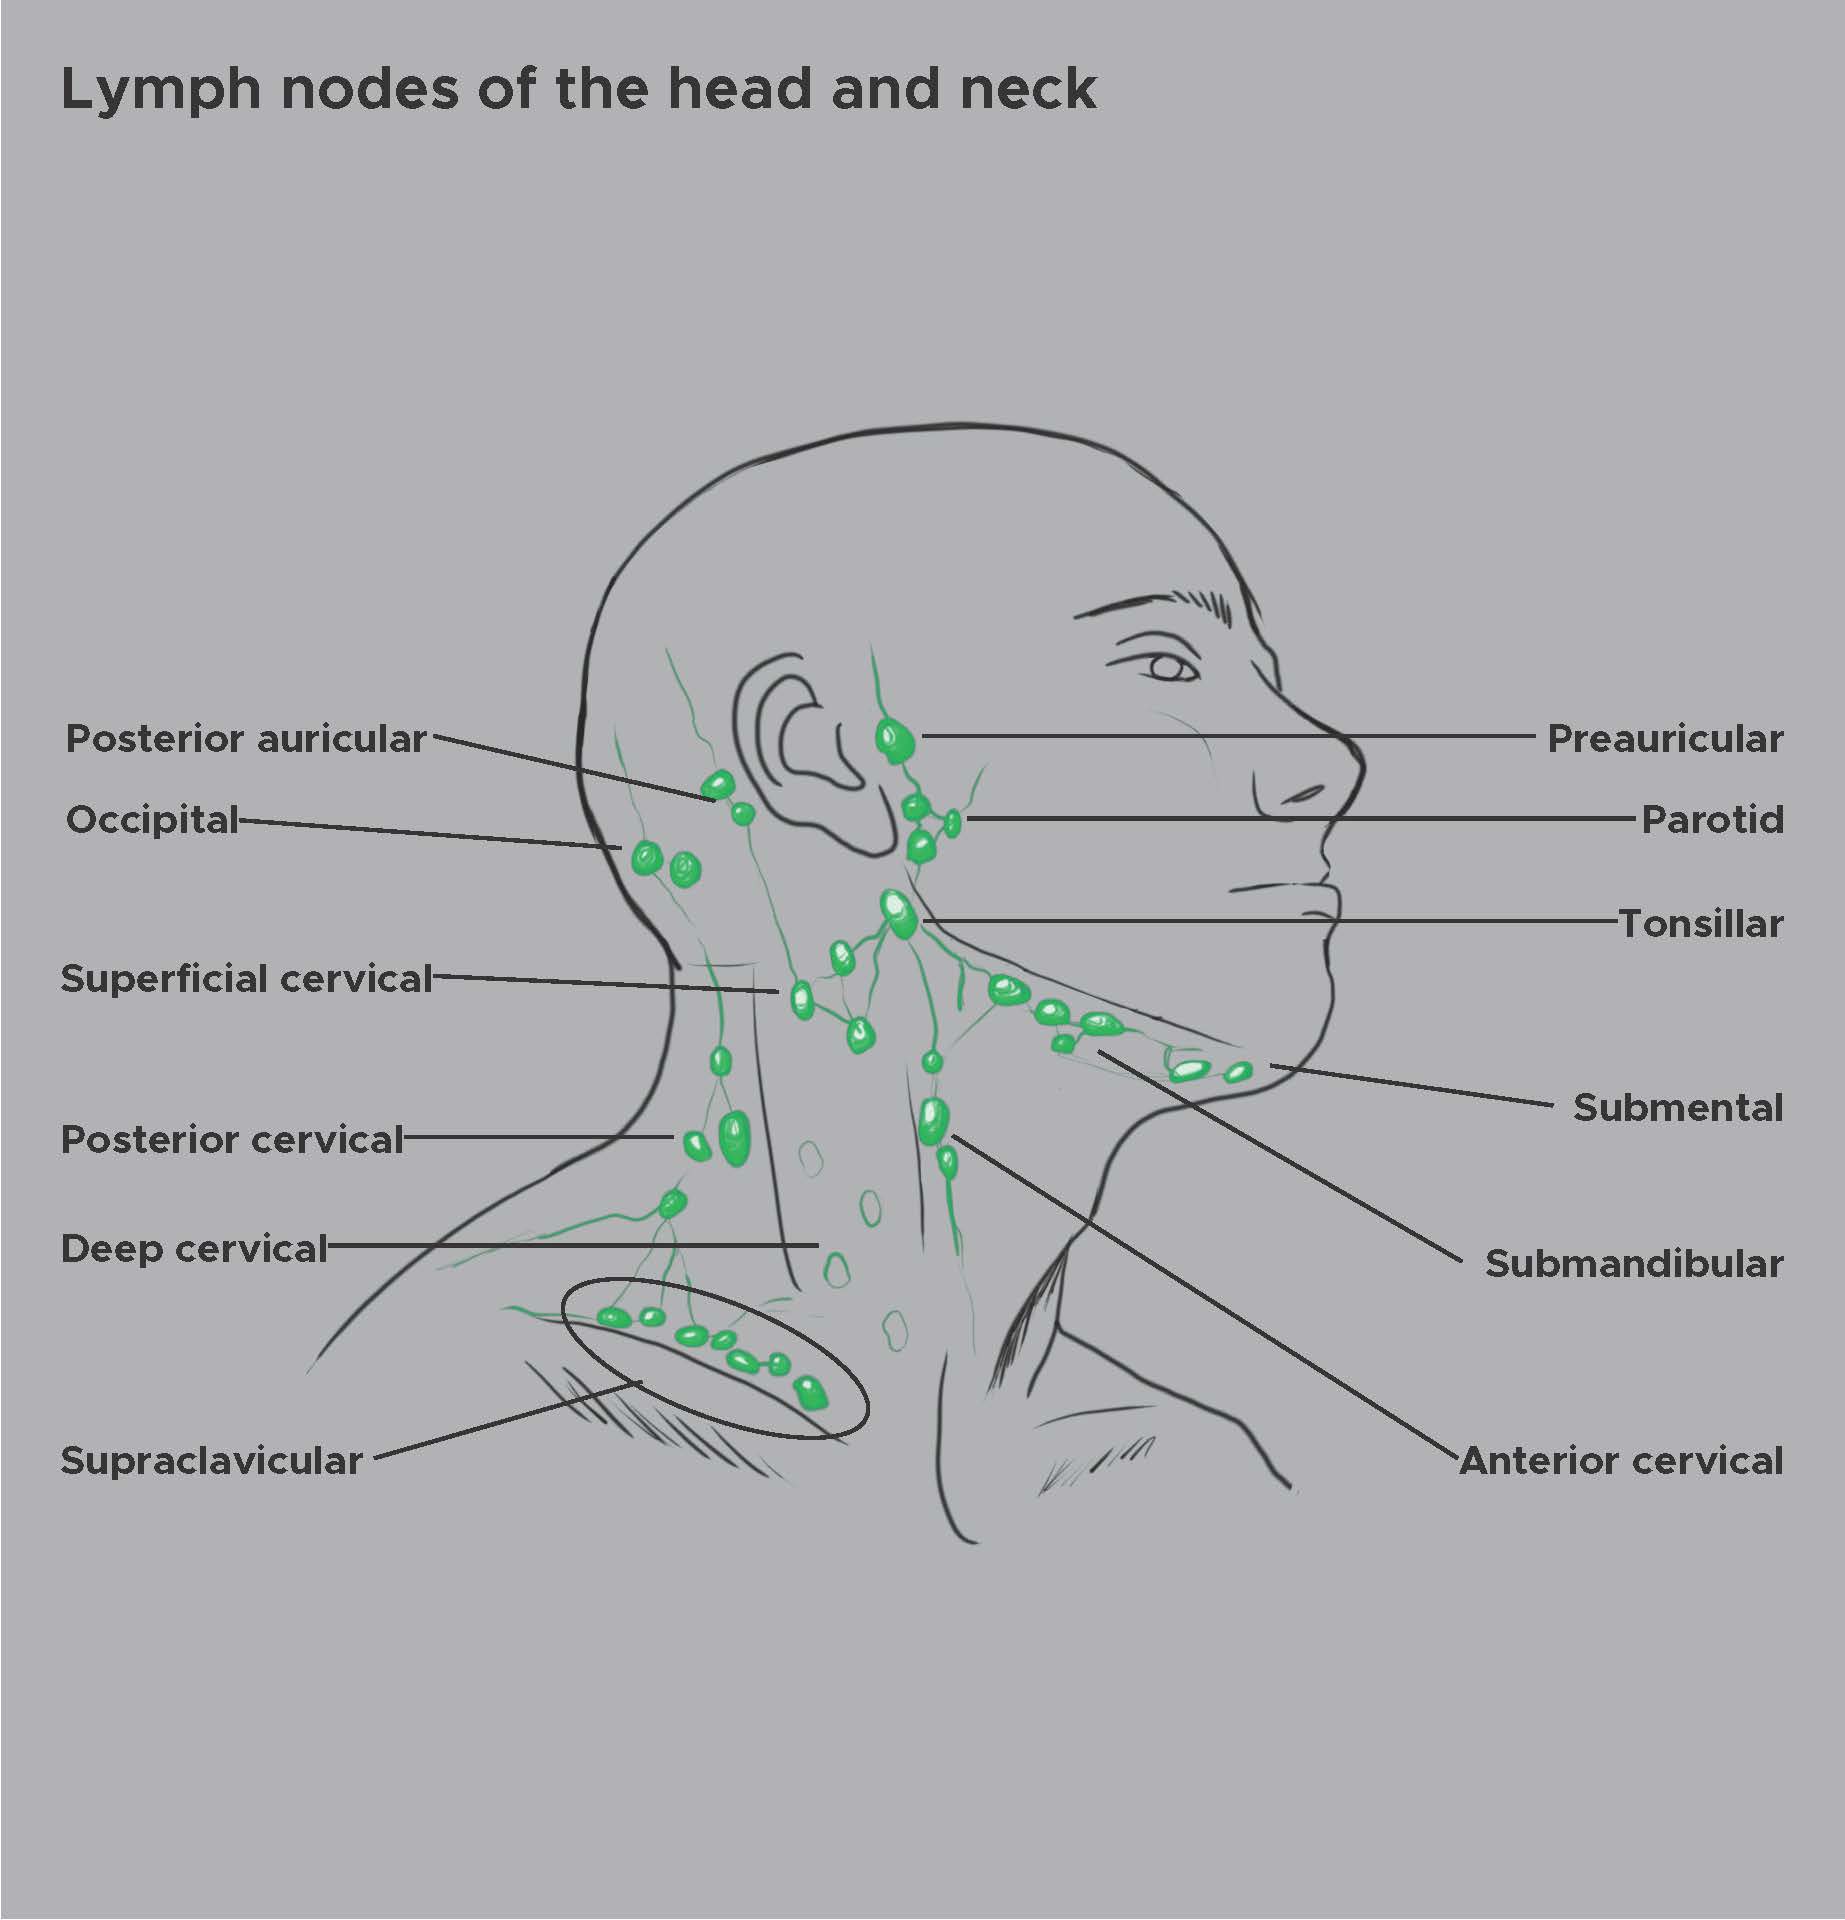 Illustration of the lymph nodes of the head and neck